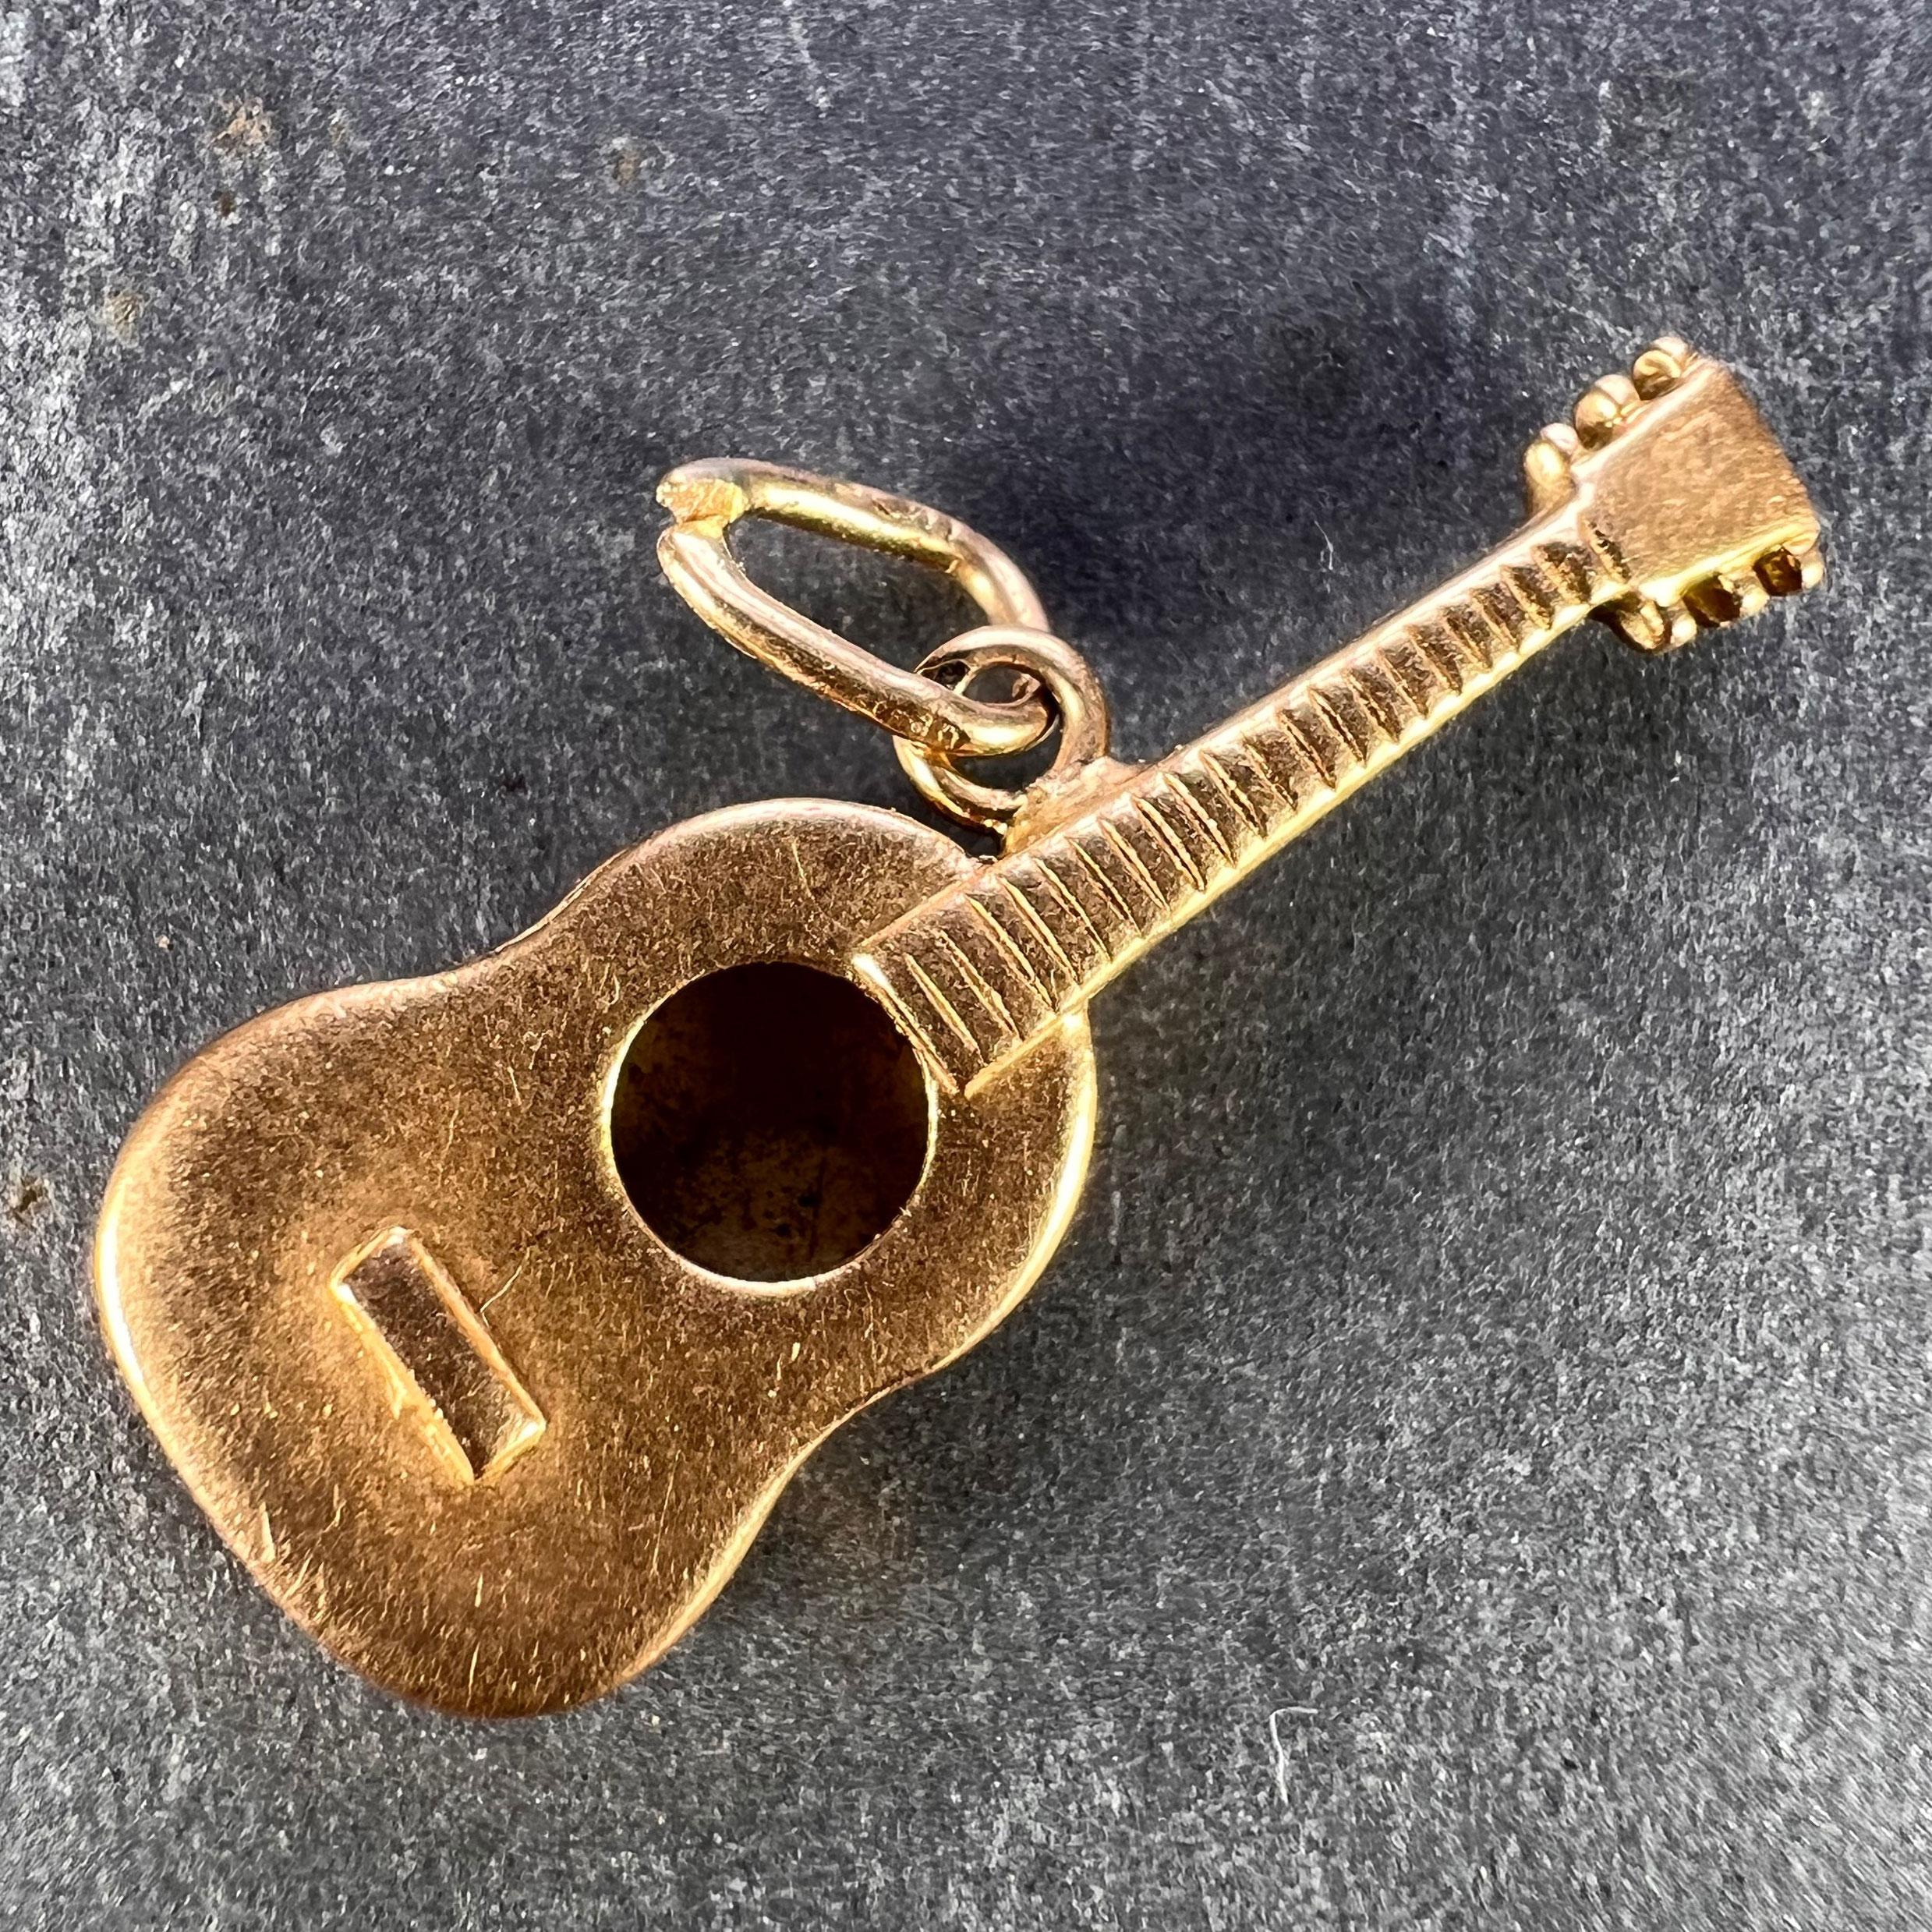 A French 18 karat (18K) yellow gold charm pendant designed as a guitar. Stamped with the eagle's head for French manufacture and 18 karat gold.

Measurements: 2.5 x 1 x 0.35 cm (not including jump ring)
Weight: 1.68 grams
(Chain not included)